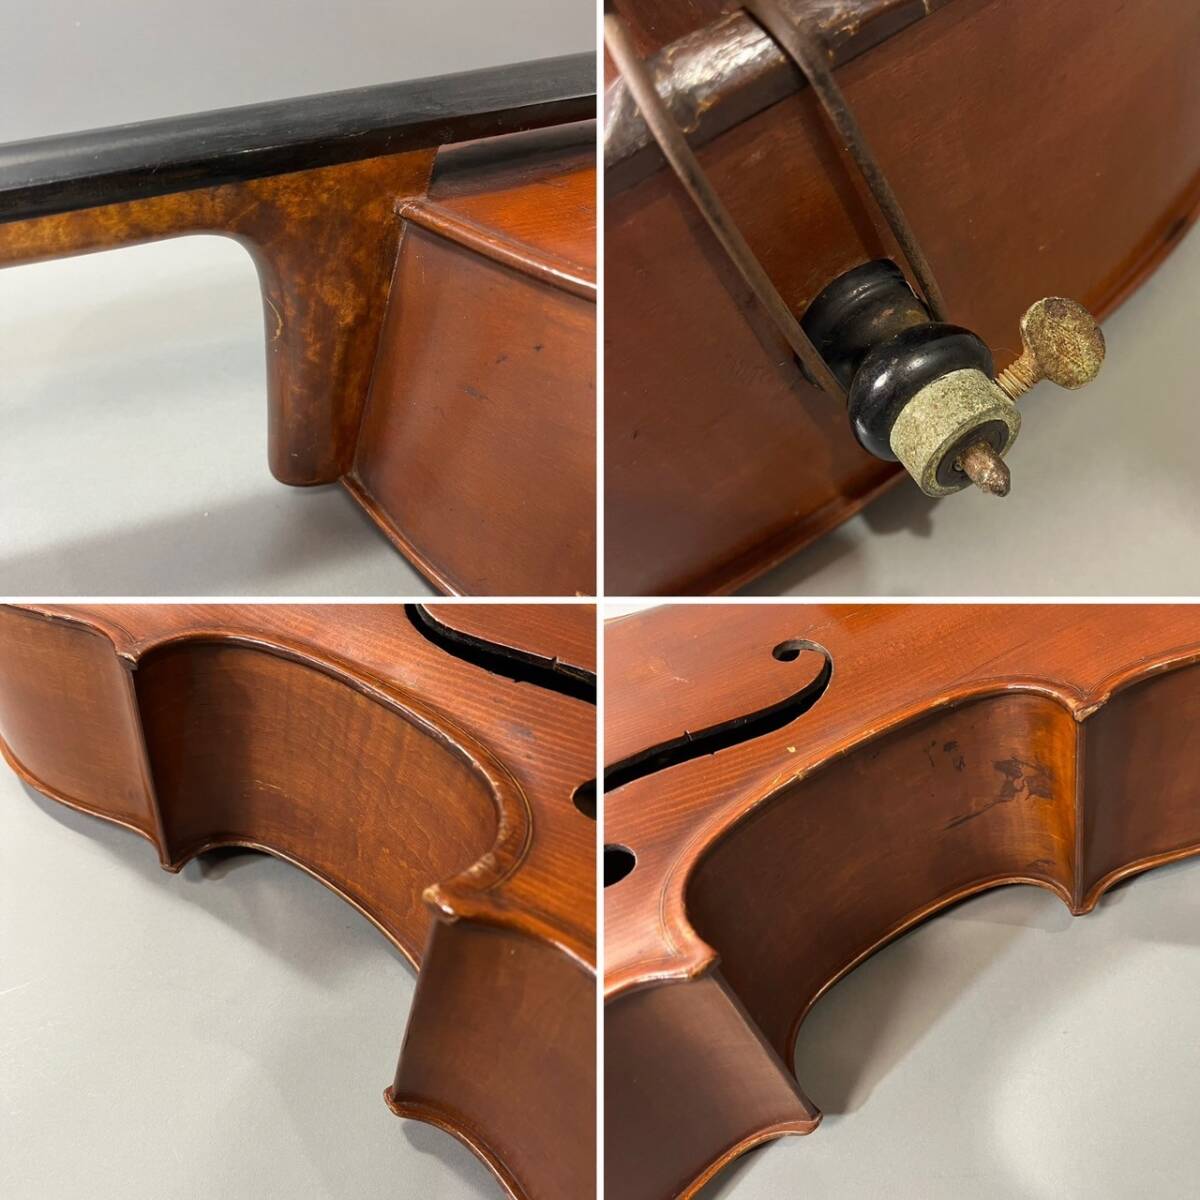 RS254 direct pickup OK gibson Gibson CELLO contrabass model.G-110-542 Kalamazoo, Mich. U.S.A. Junk ( inspection ) stringed instruments used Vintage 